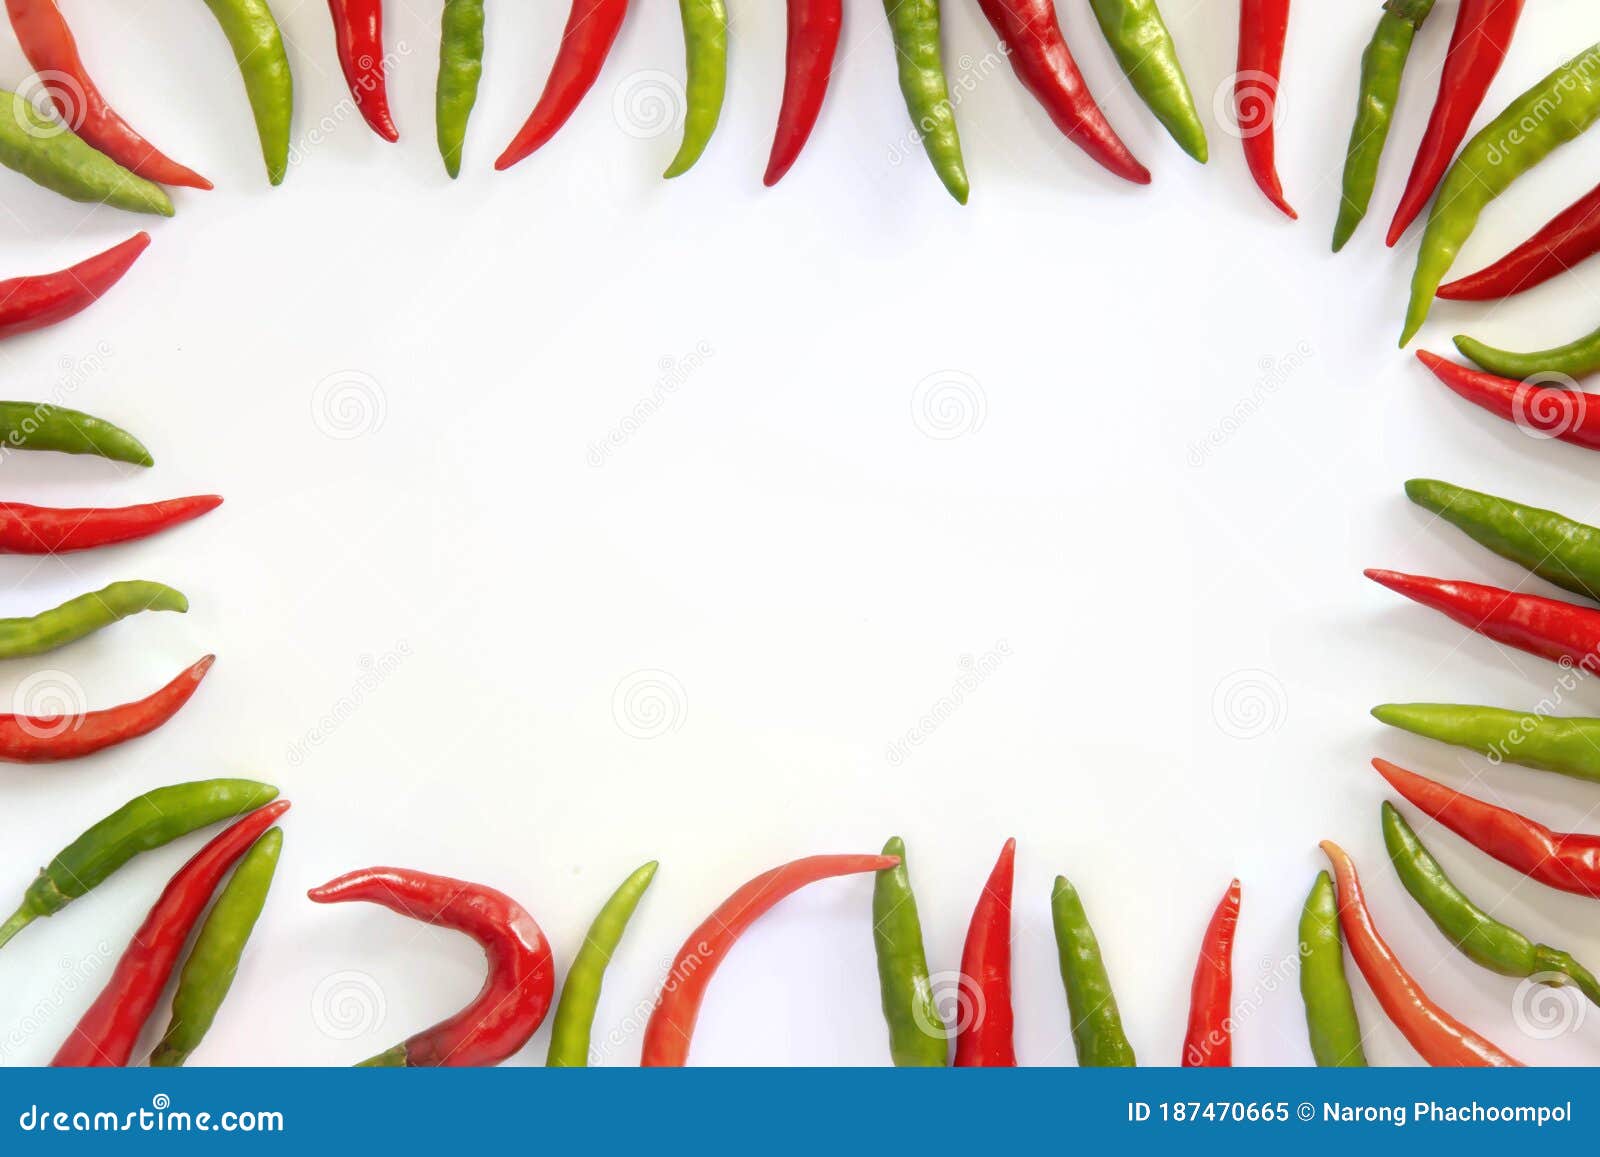 Flat Lay Red Hot Chillii Peppers Pattern Isolated on White with Clipping  Path. Red Spicy Chili Peppers Wallpaper Pattern Stock Image - Image of  hungarian, fruit: 187470665